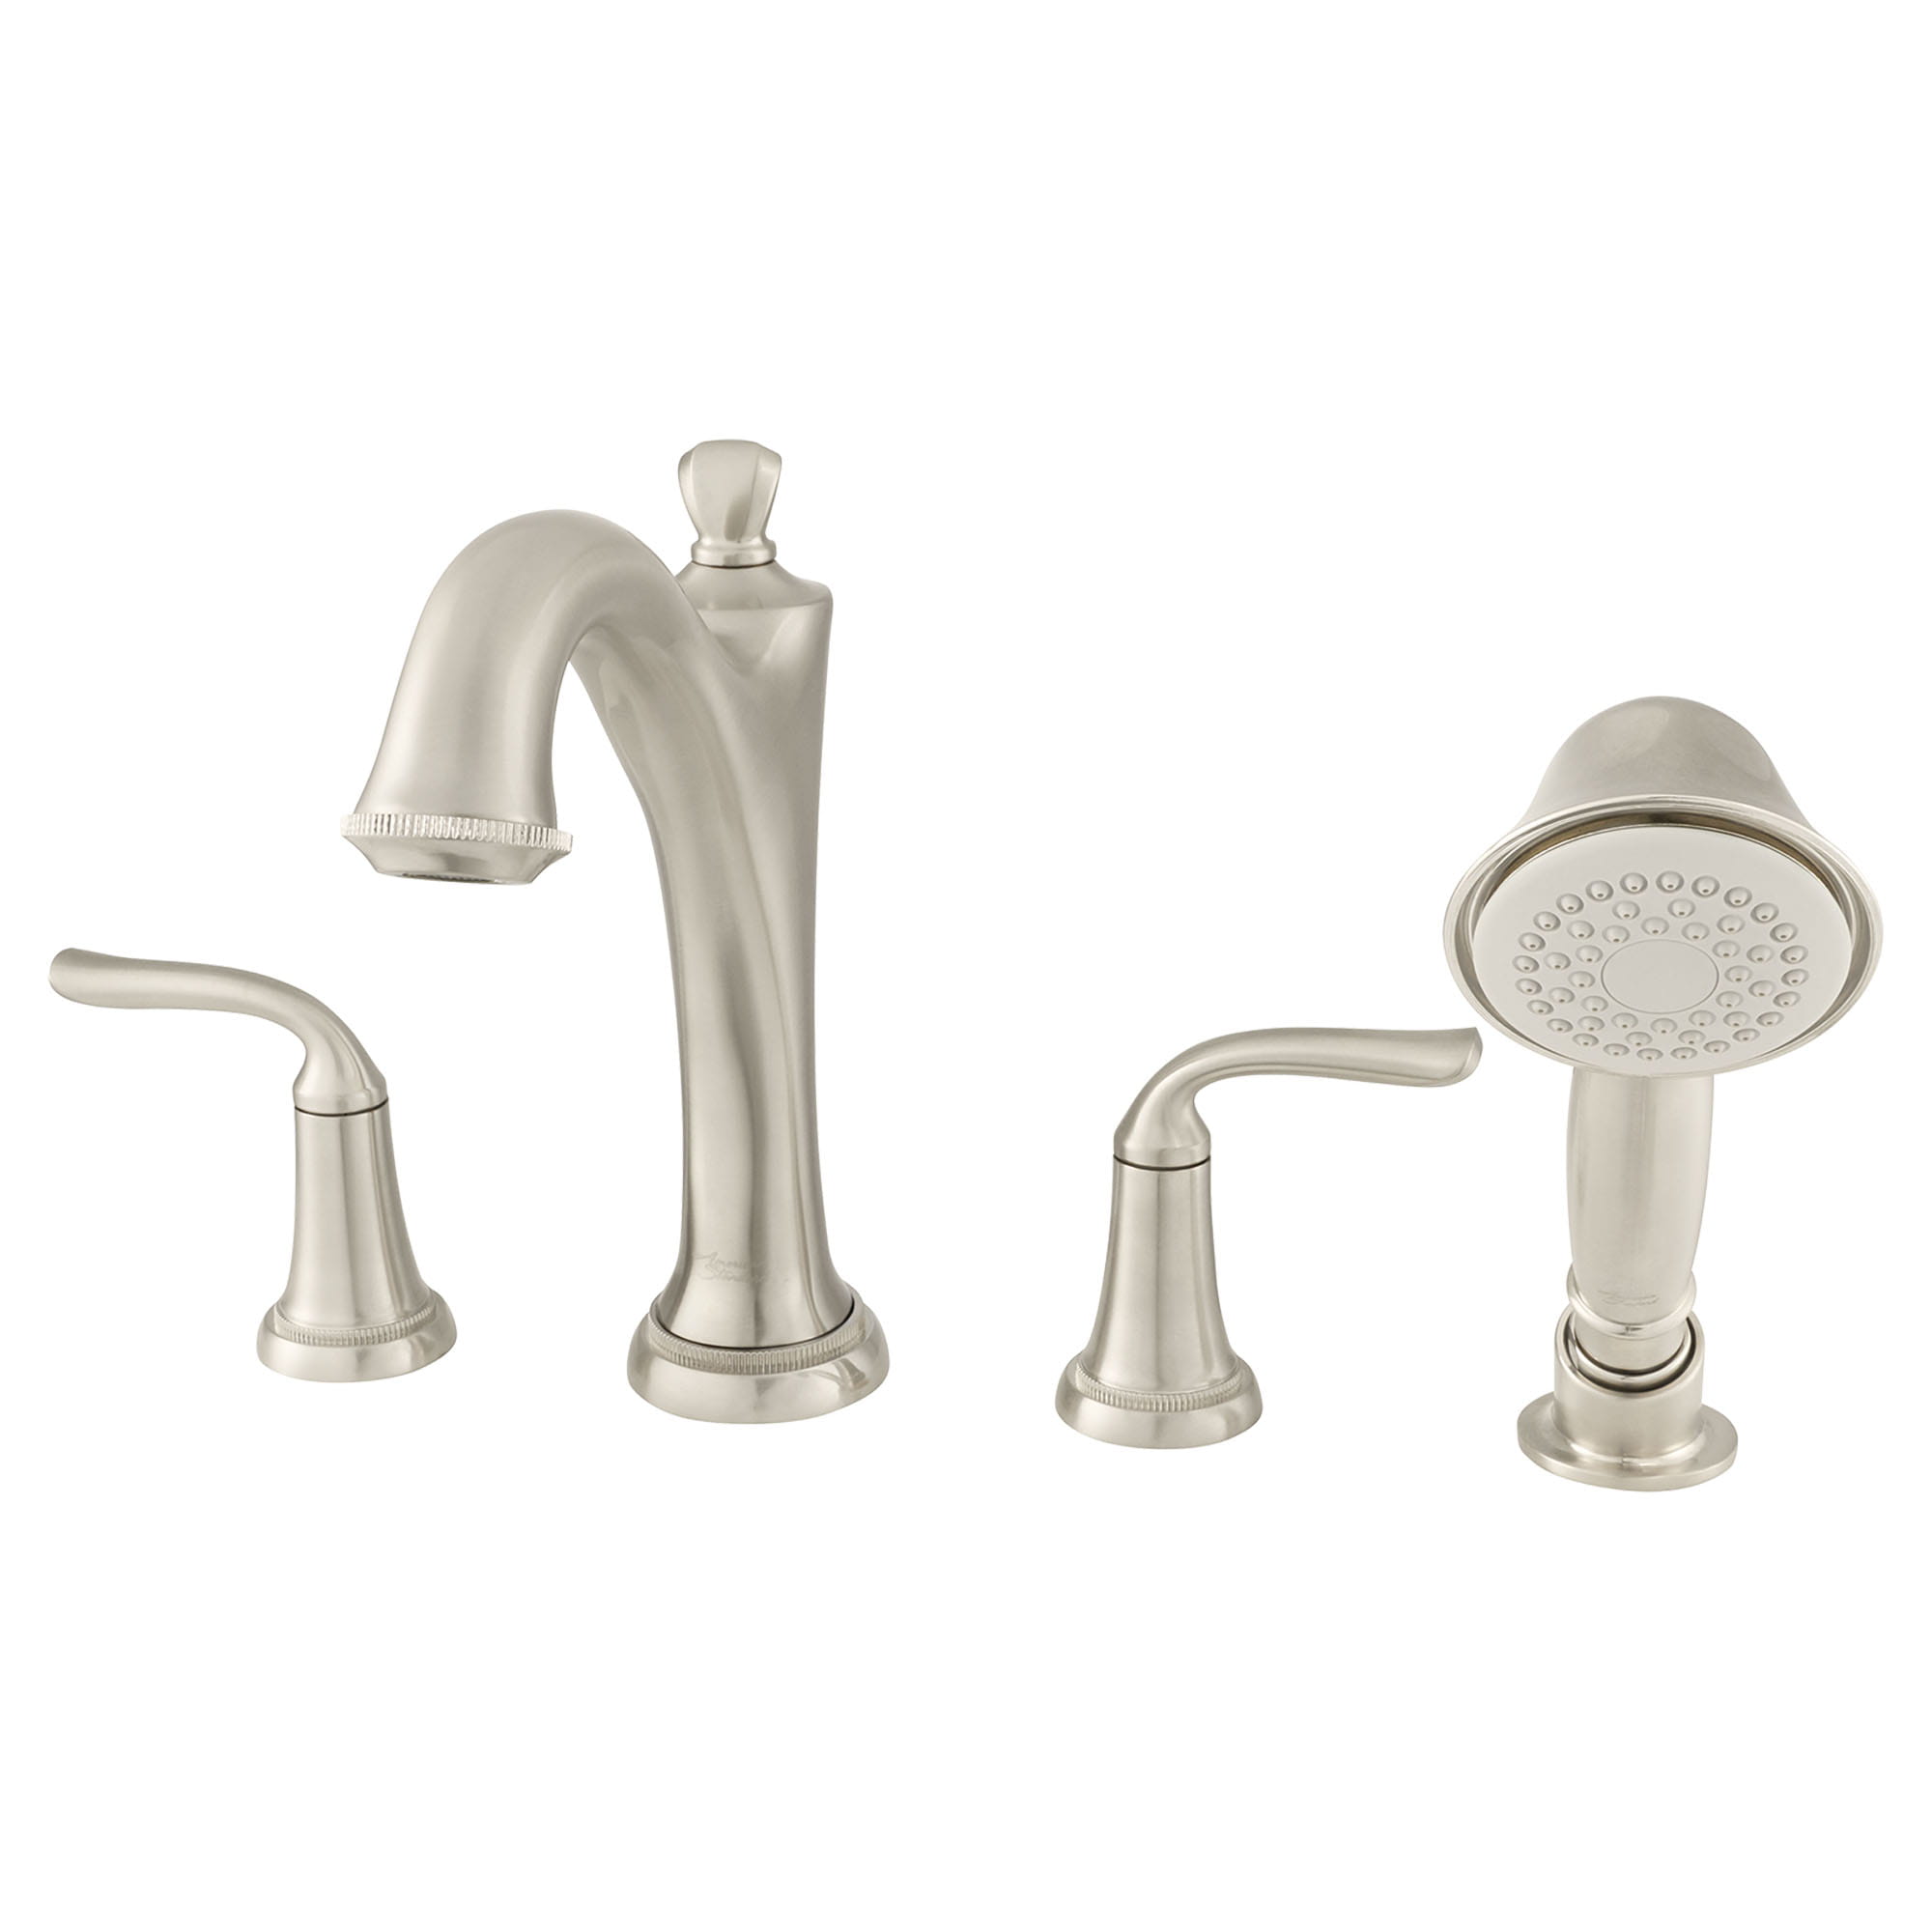 Patience® Bathtub Faucet With Lever Handles and Personal Shower for Flash® Rough-In Valve